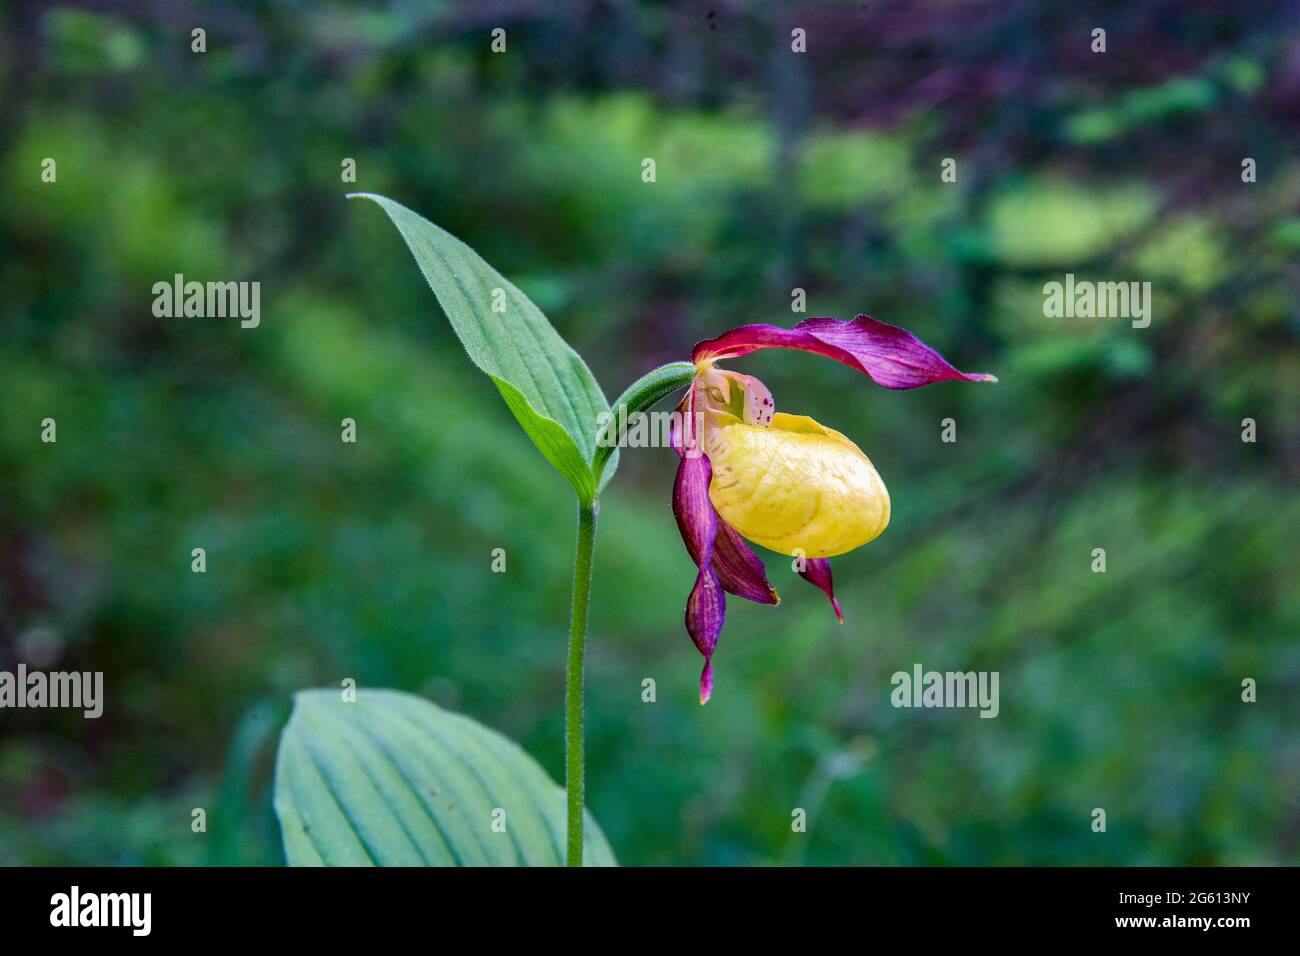 France, Savoie, Champagny-en-Vanoise, Lady's-slipper orchid (Cypripedium calceolus), in undergrowth in a natural reserve, protected region Stock Photo